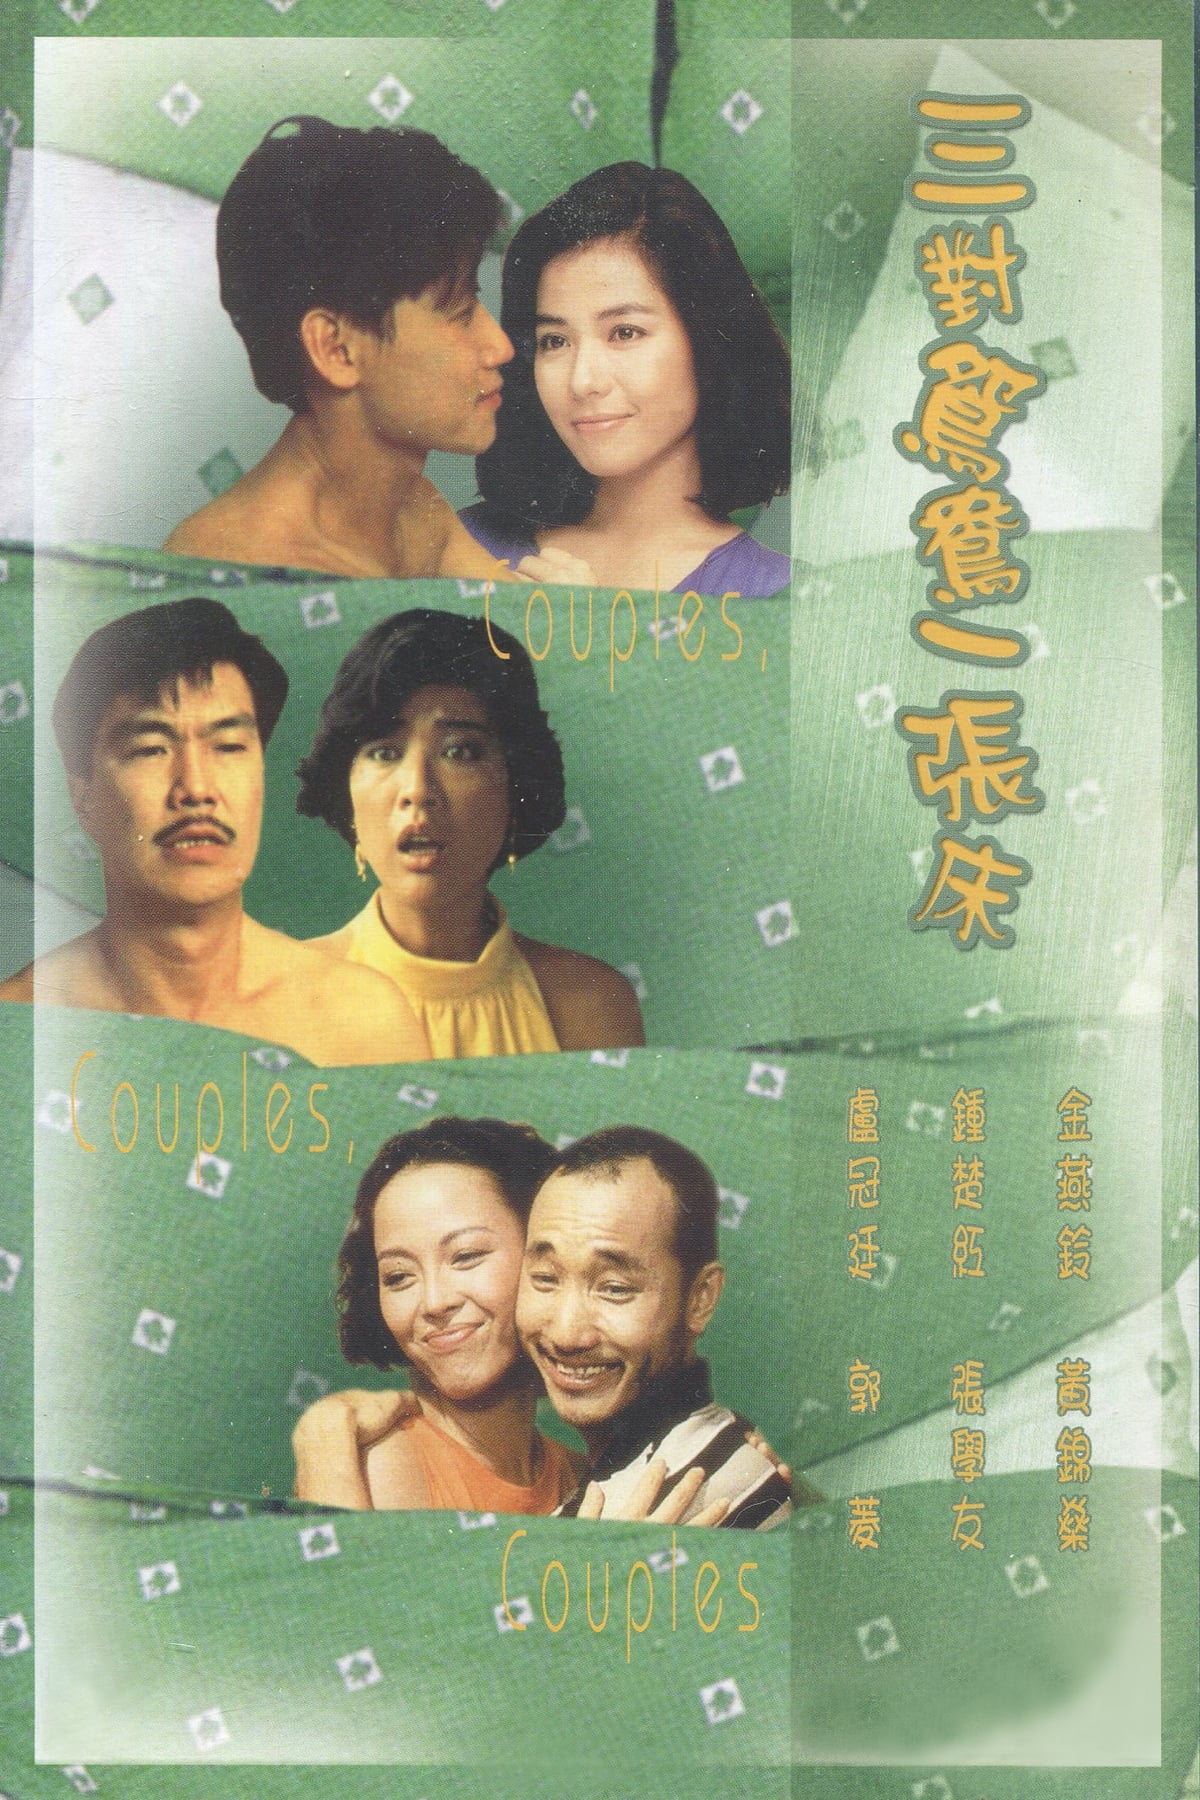 Couples, Couples, Couples (1988)